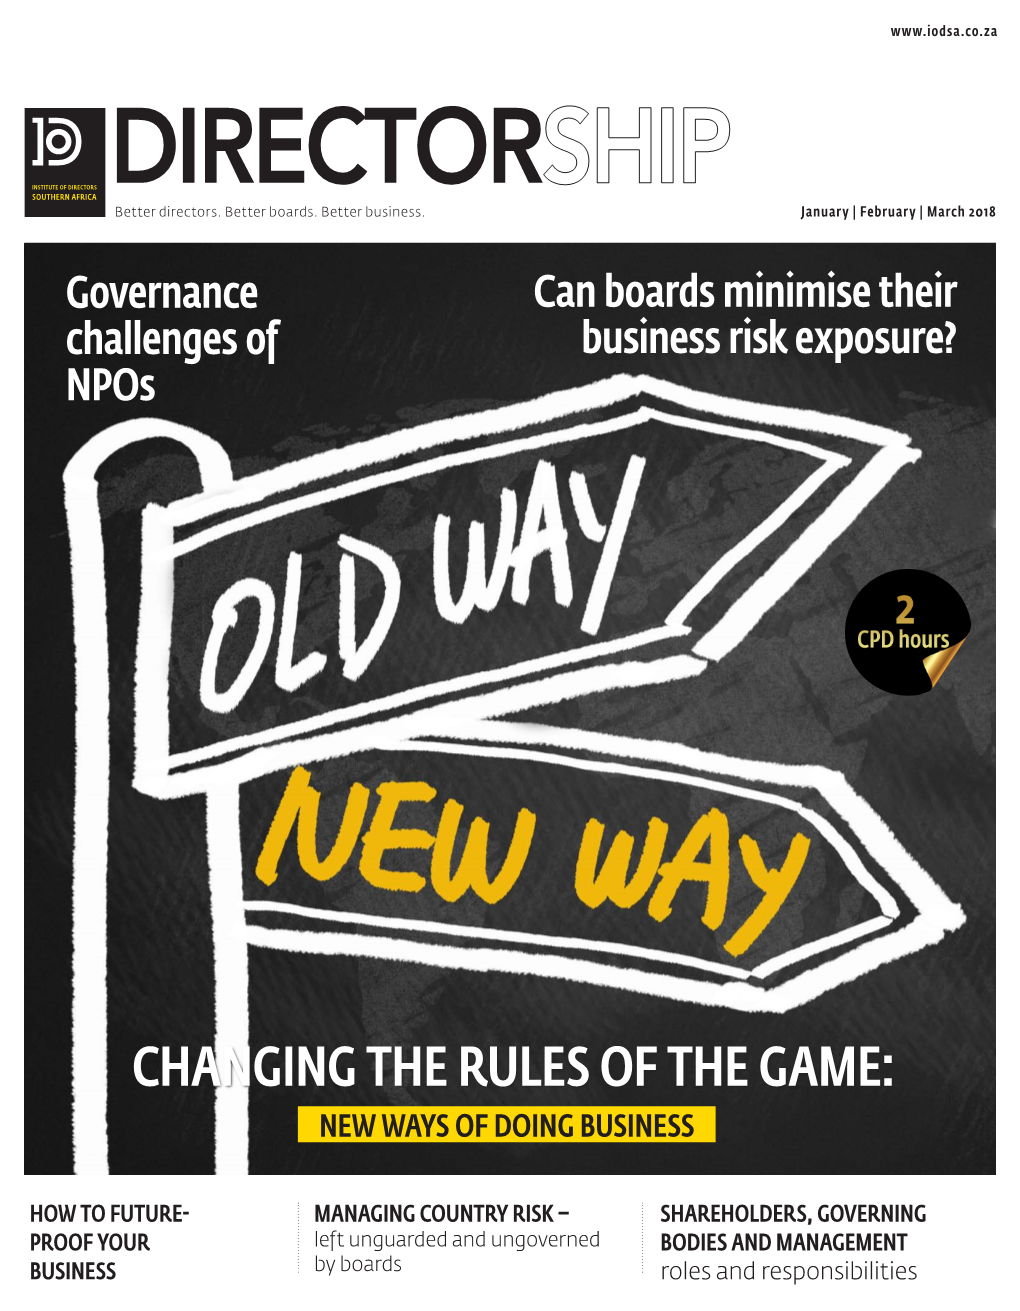 Changing the Rules of the Game: New Ways of Doing Business